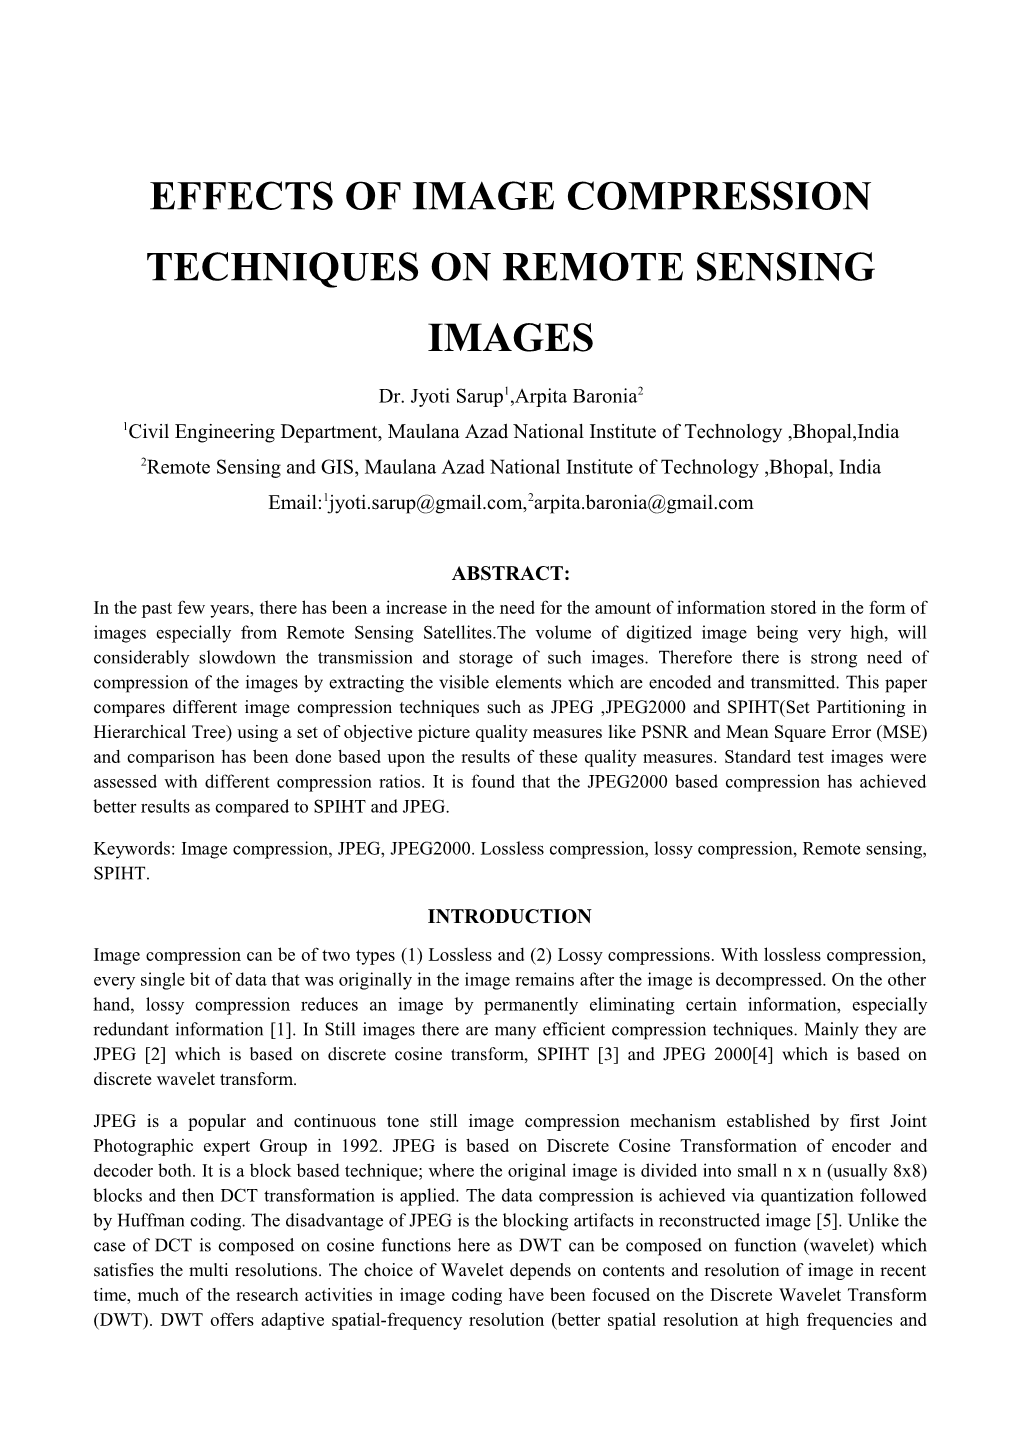 Effects of Image Compression Techniques on Remote Sensing Images